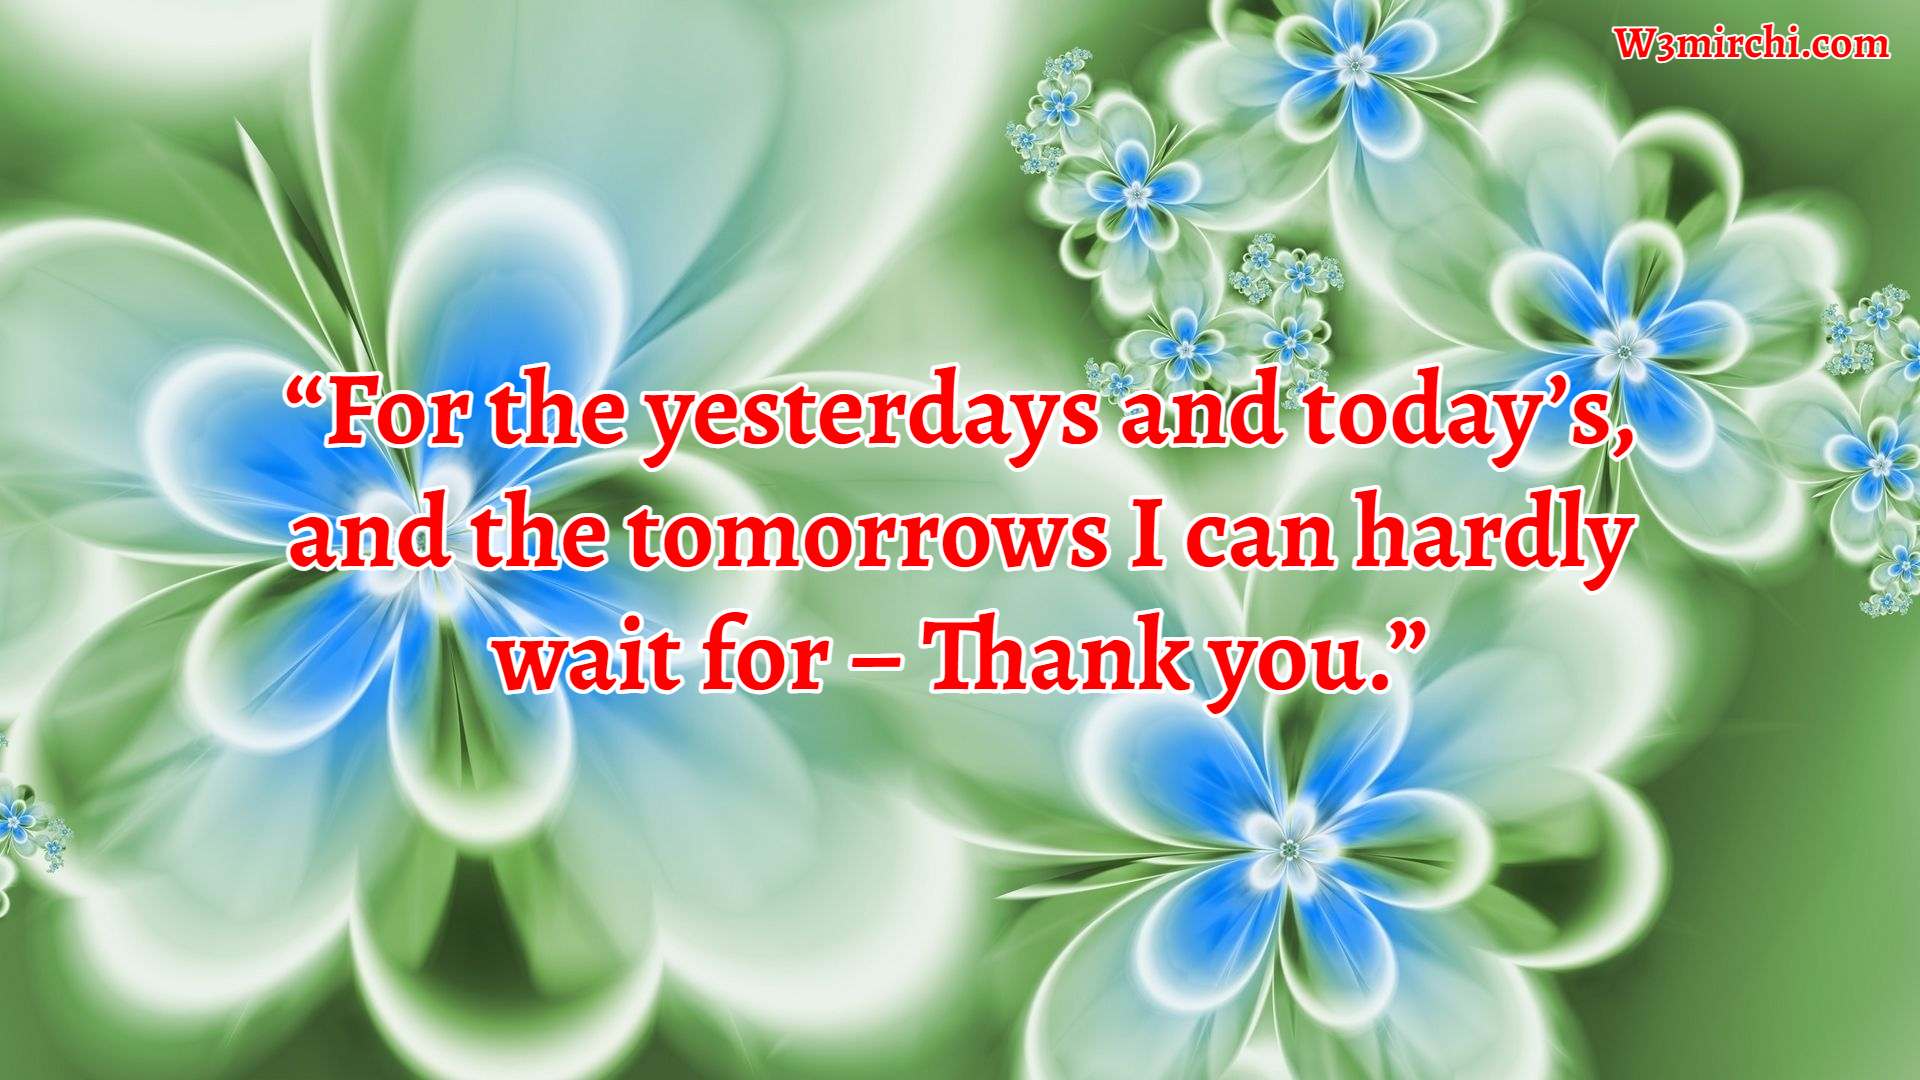 “For the yesterdays and today’s,